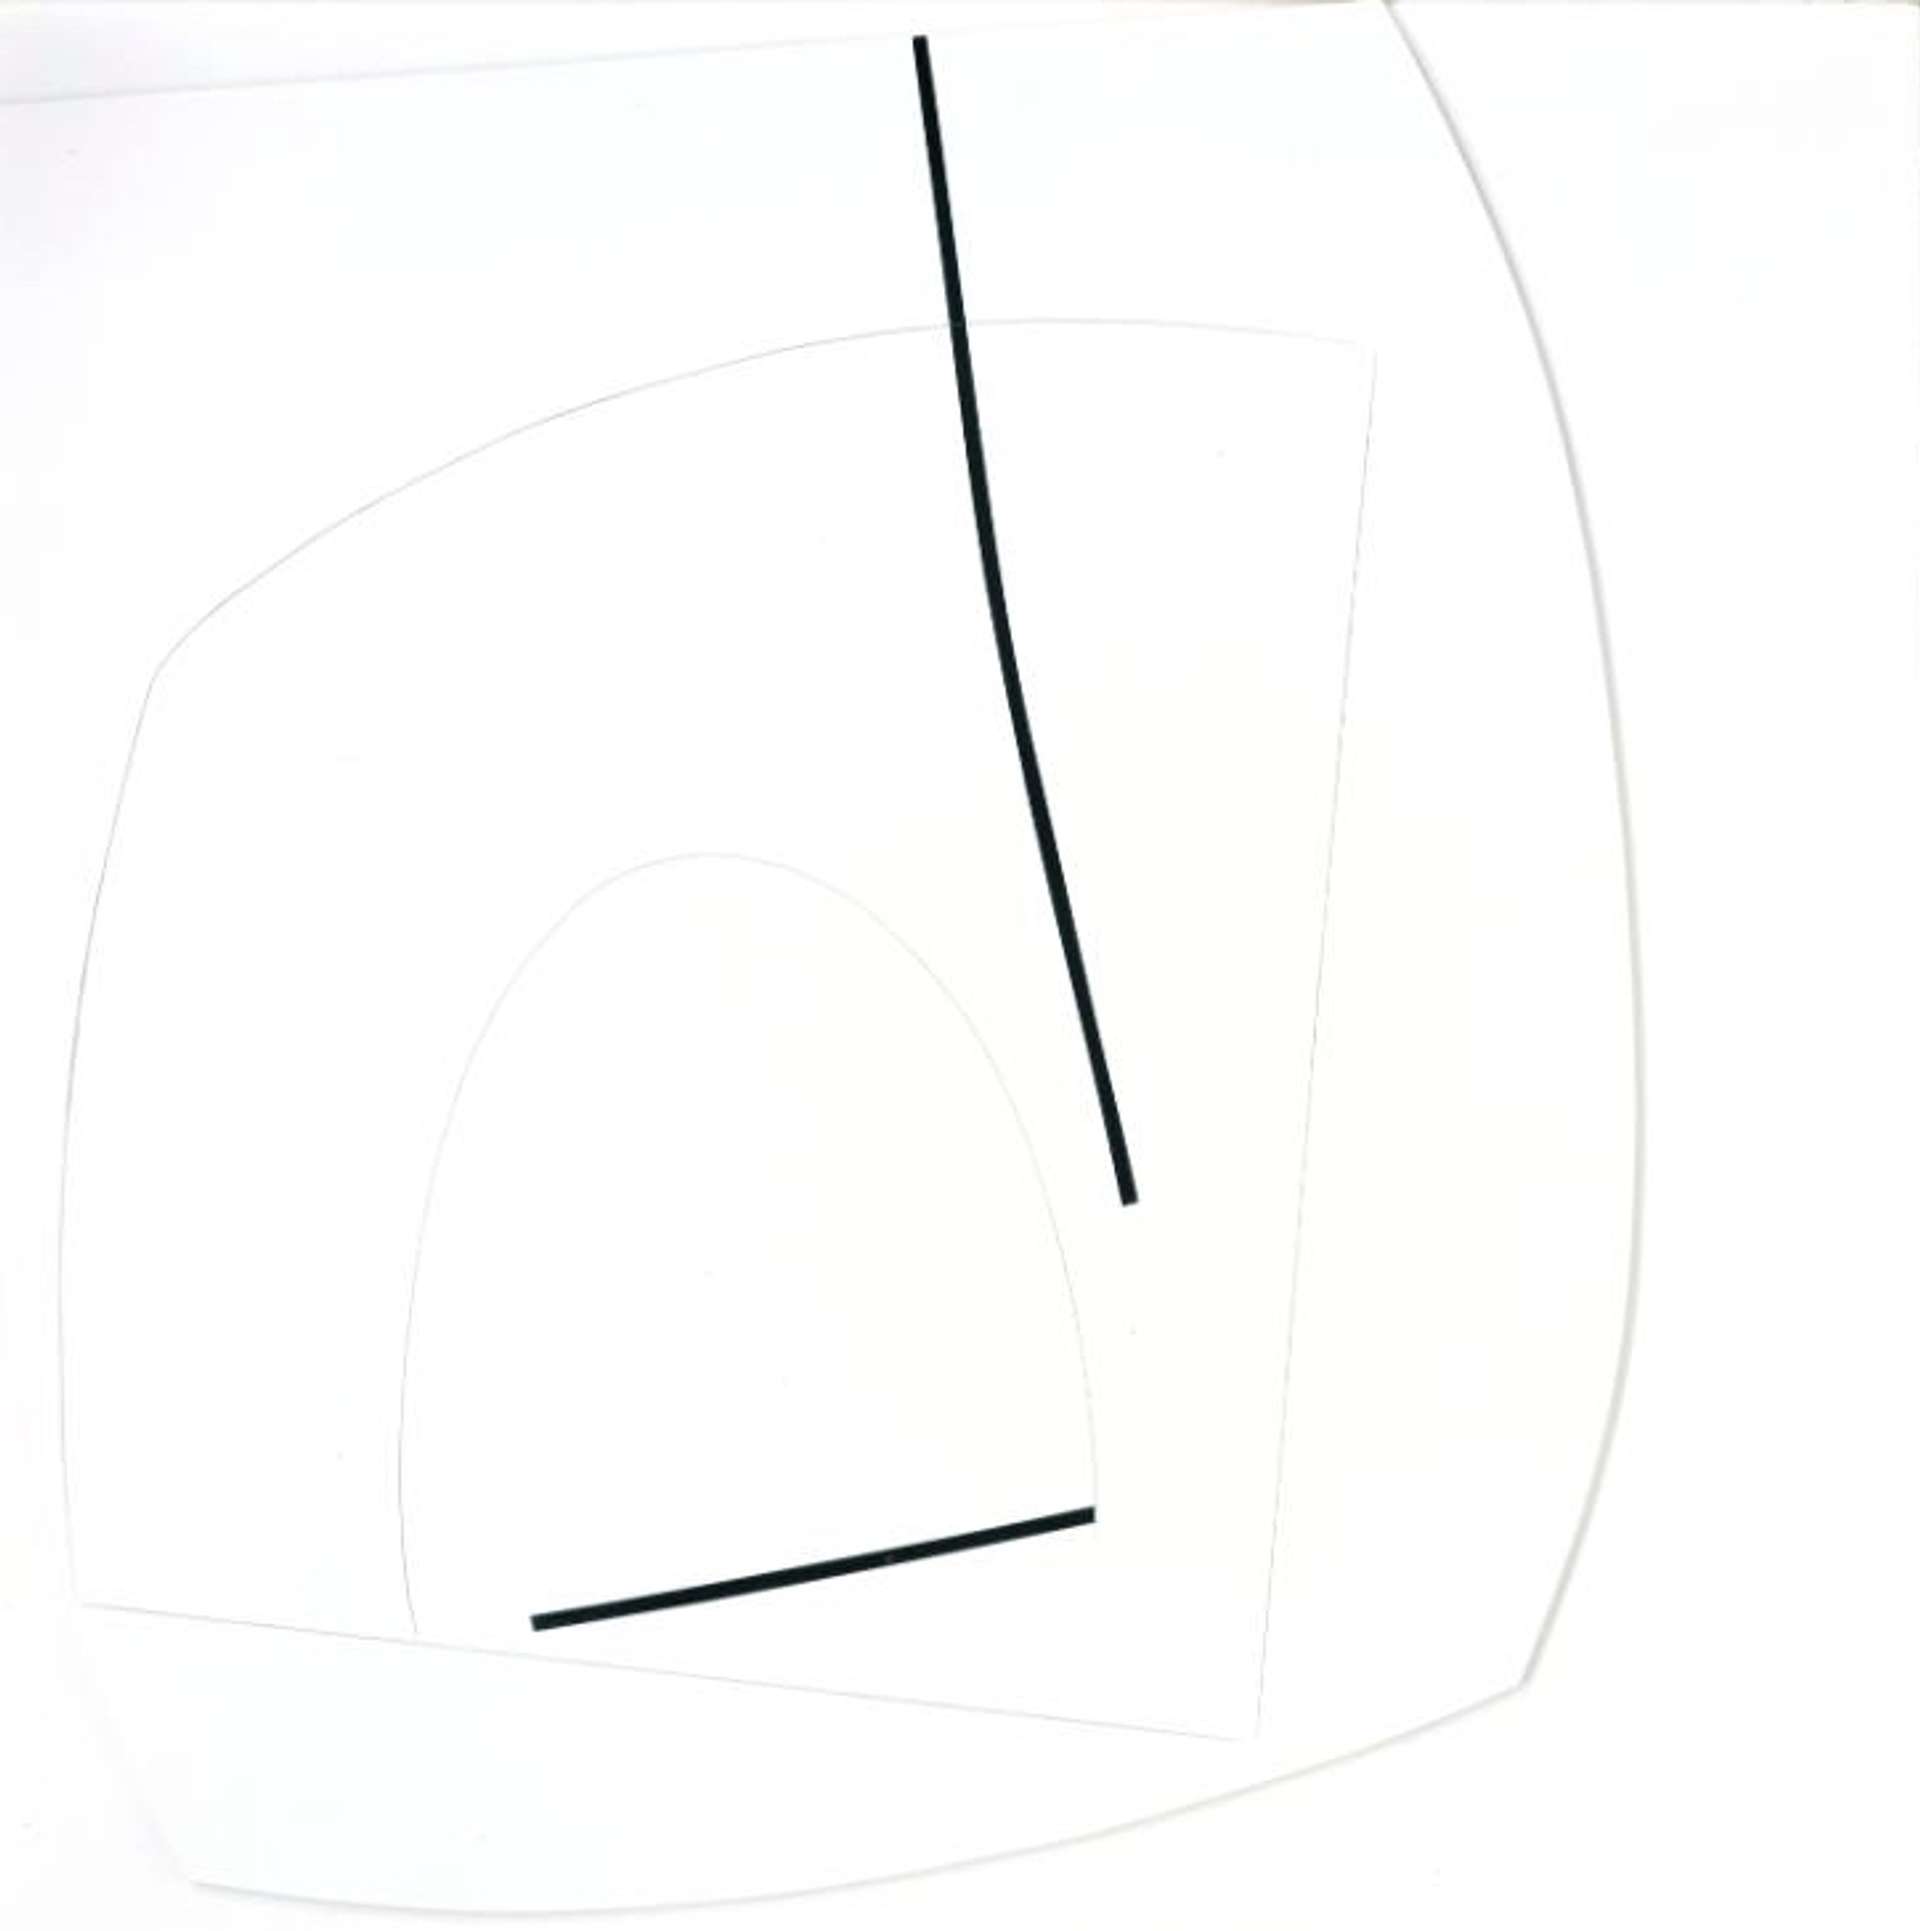 An abstract painting titled "Linear Motif In Black And White" featuring black lines arranged in a geometric pattern on a white background. The lines vary in thickness and direction, creating a sense of movement and depth.